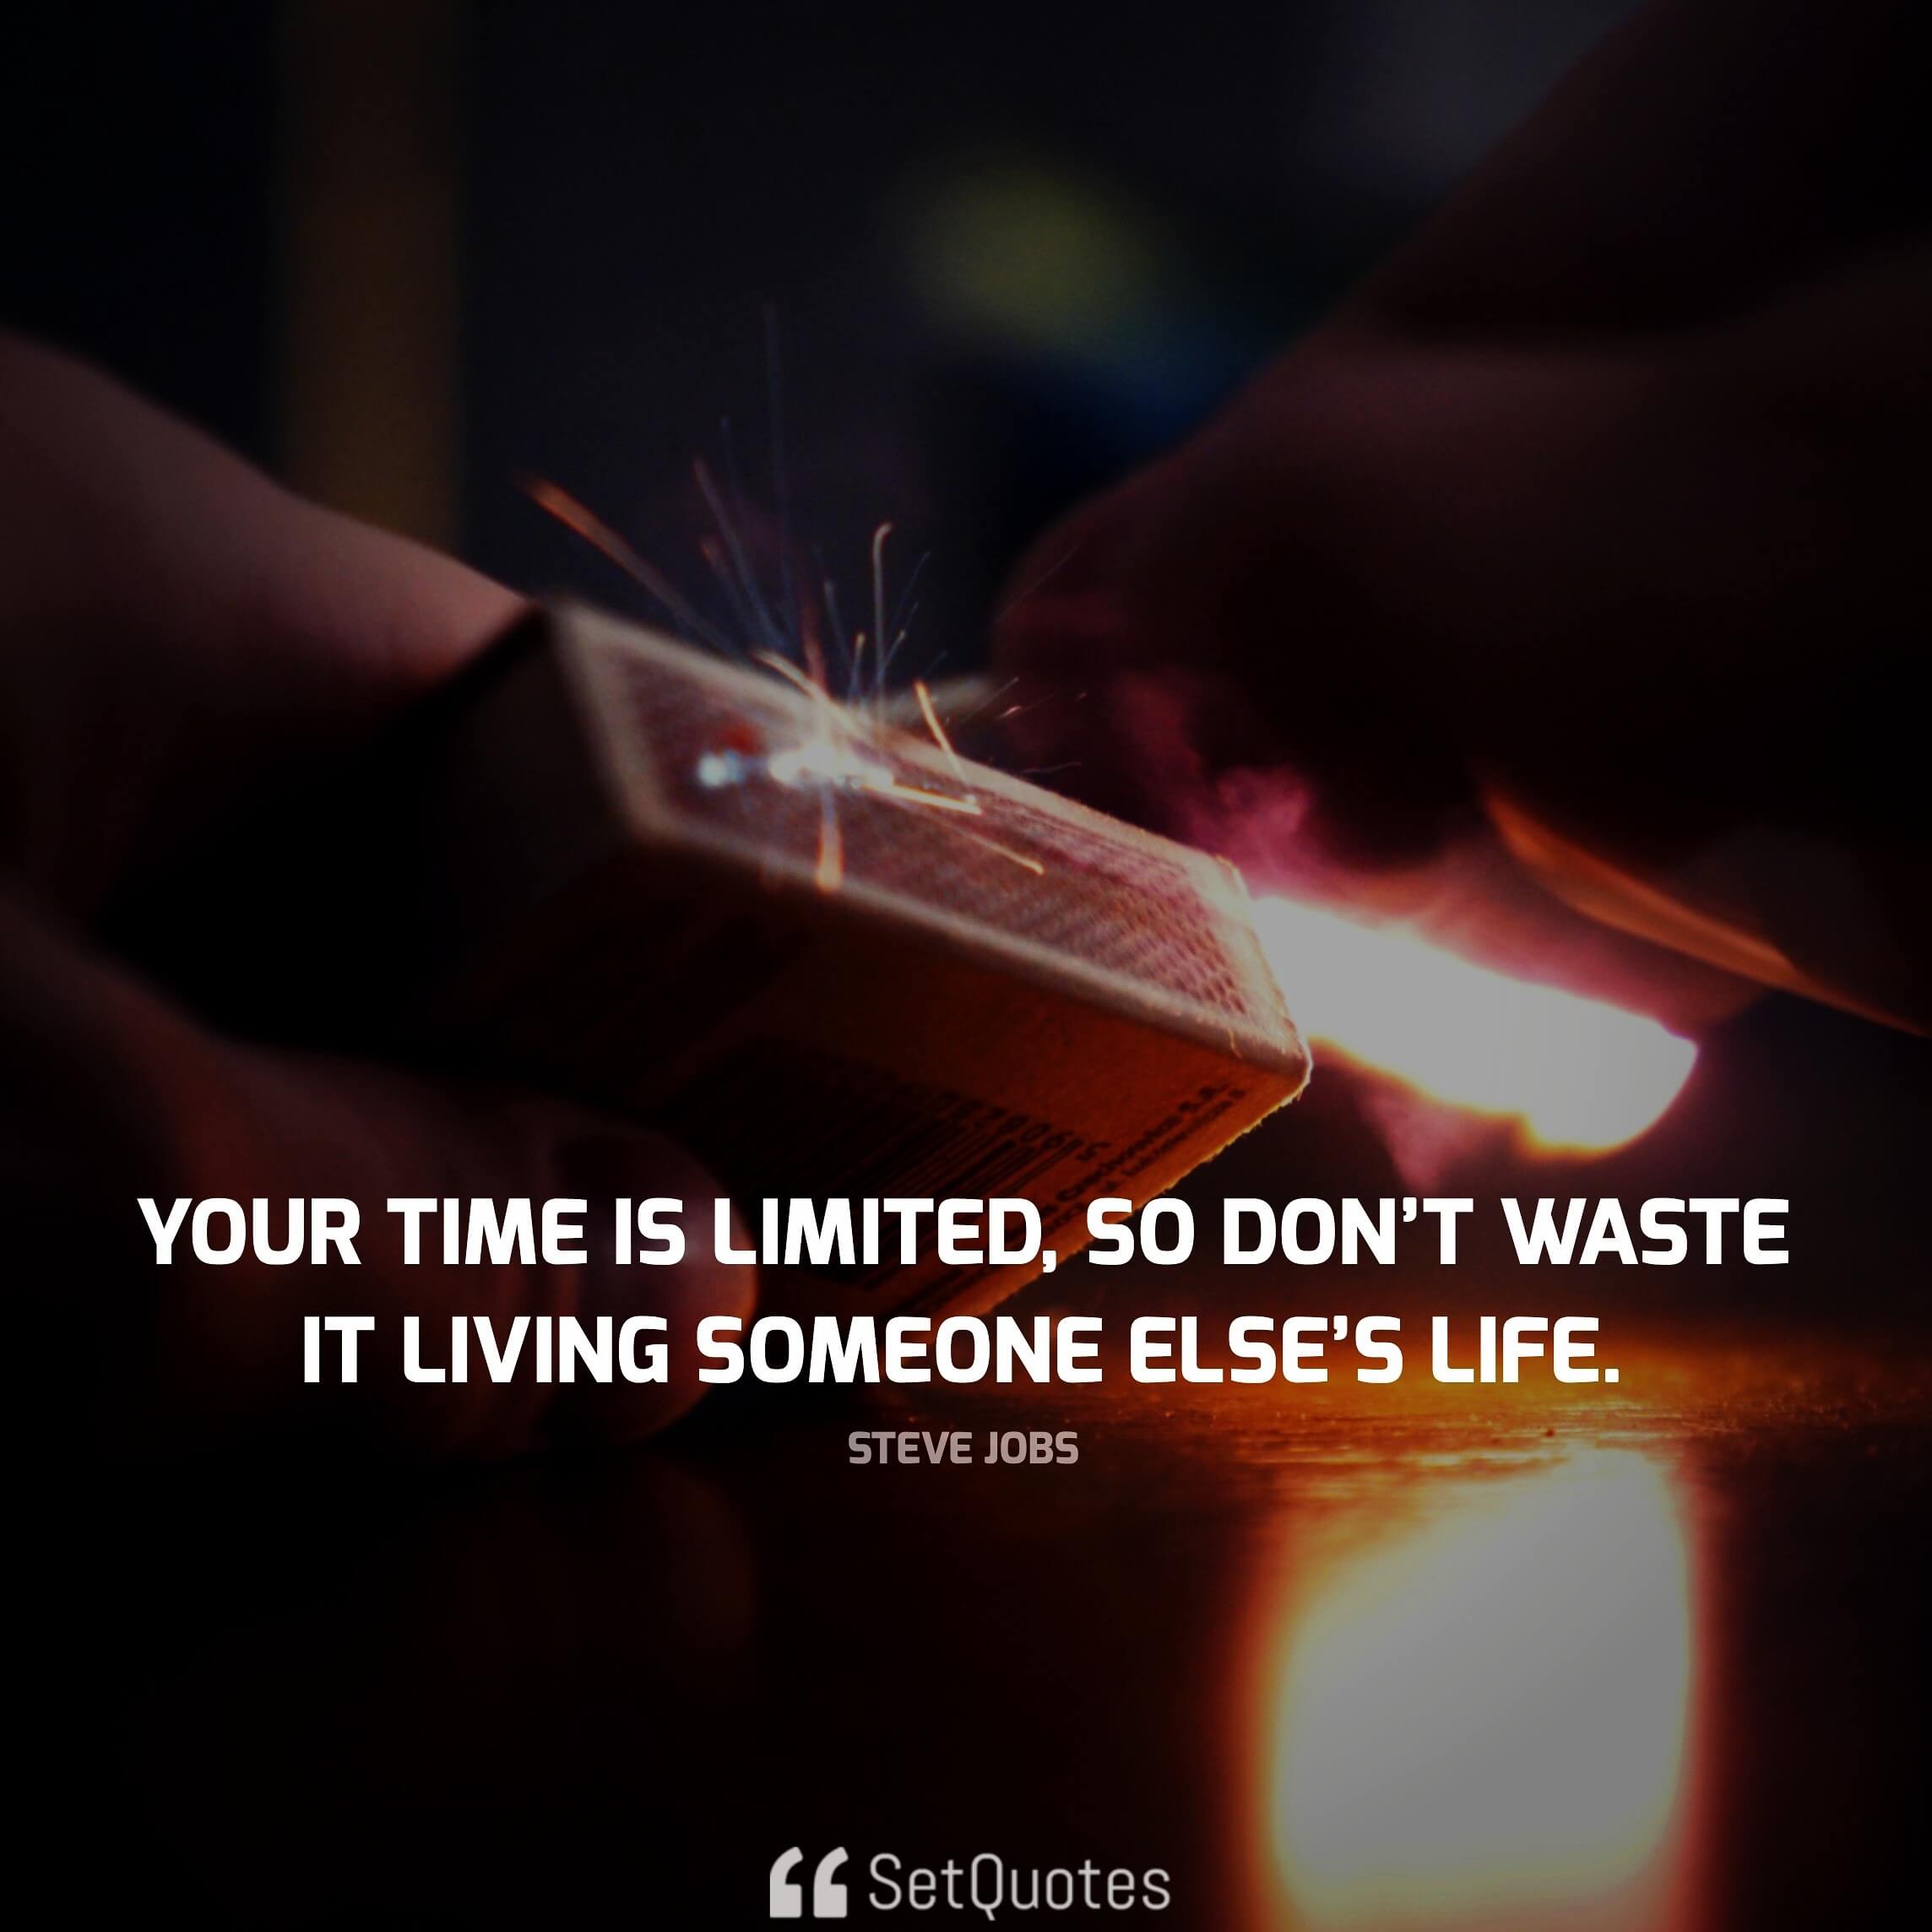 Your time is limited, so don’t waste it living someone else’s life. - steve jobs quotes